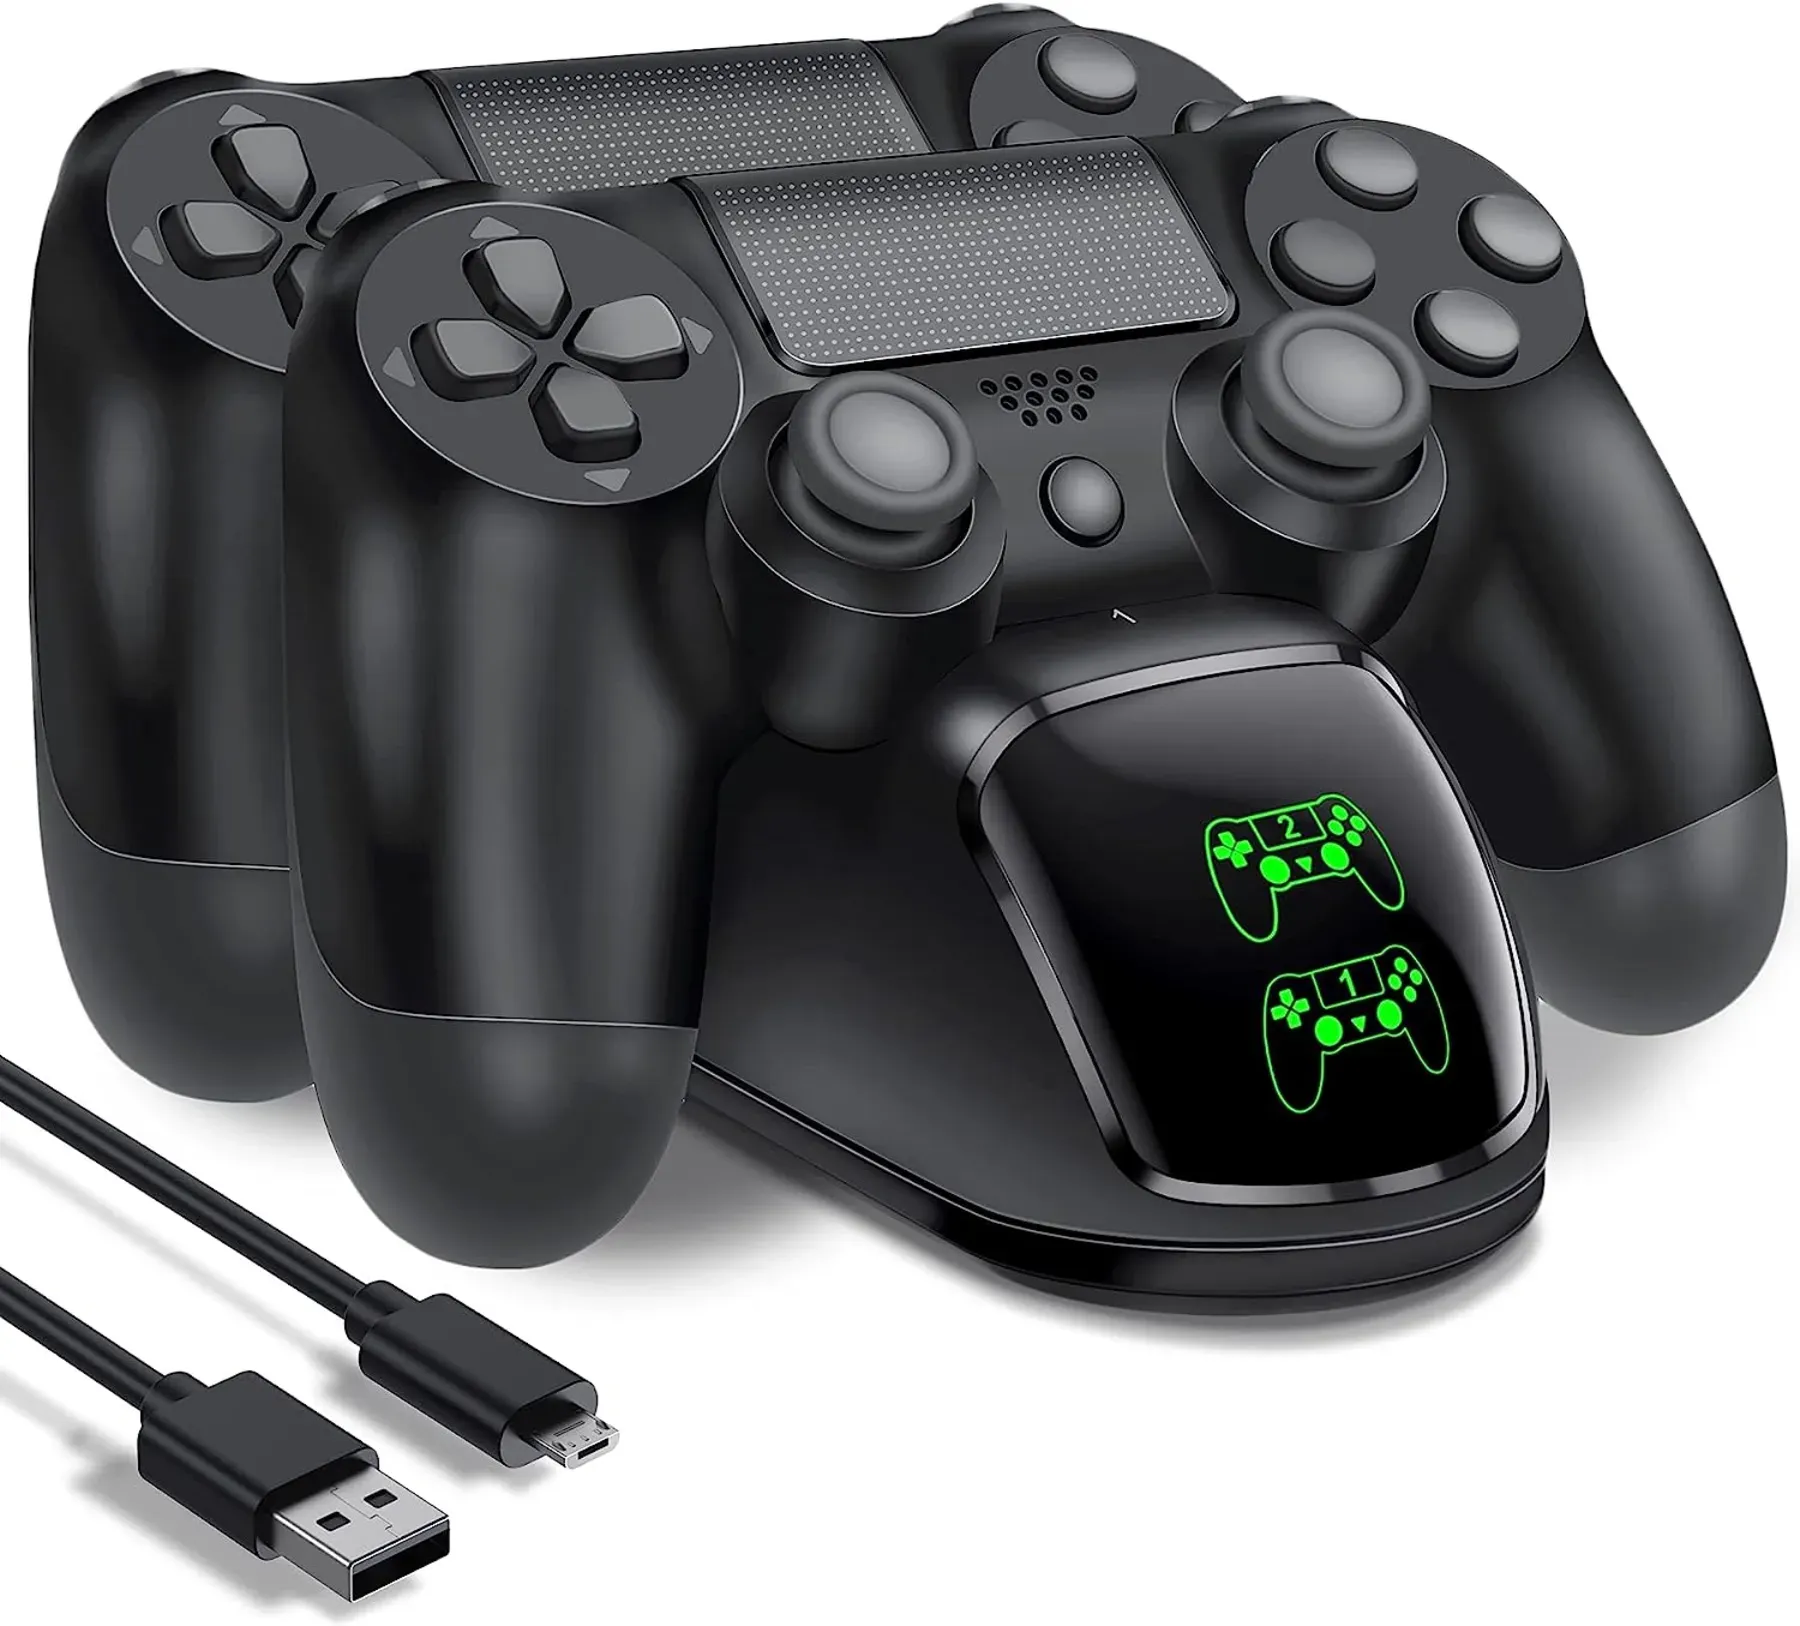 Game on, Non-Stop! Discover the Next-Level Charger Station for PS4.